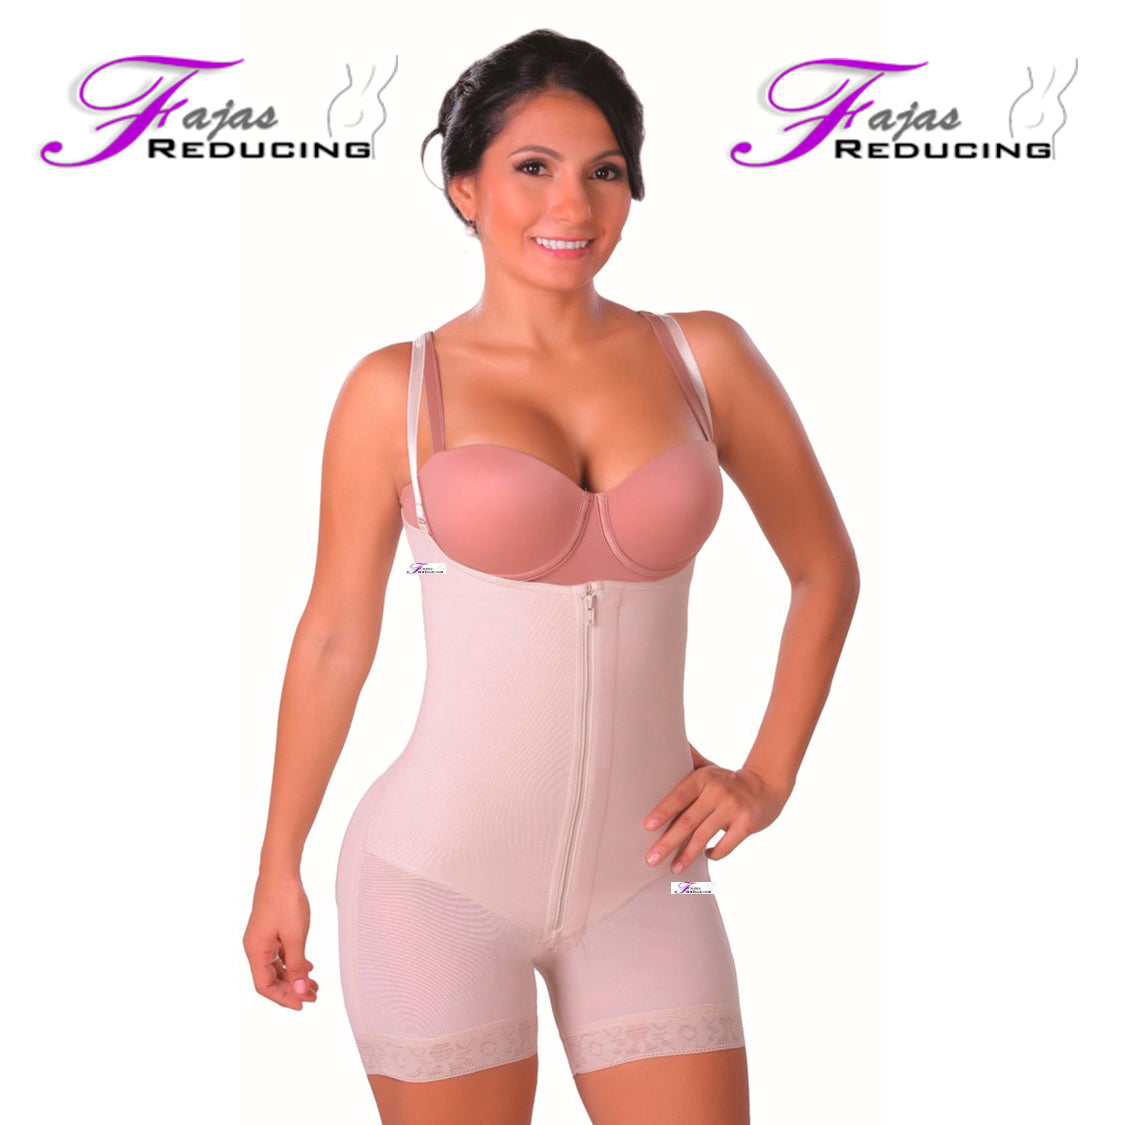 Short Colombian Shaper Girdle with thick strap